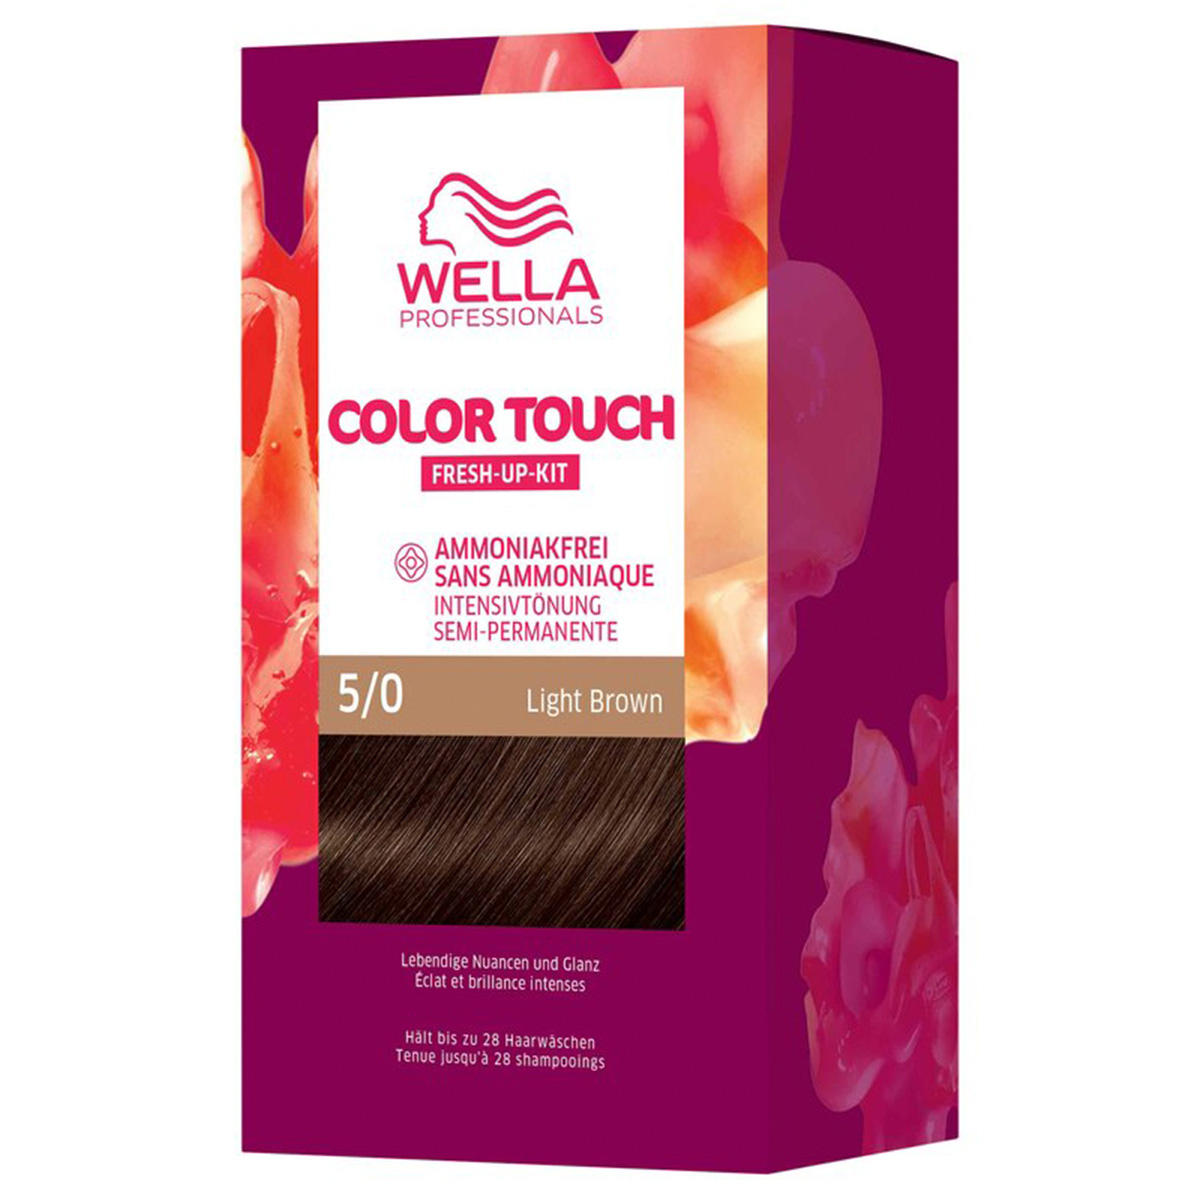 Wella Color Touch Fresh-Up-Kit 5/0 Light Brown - 1